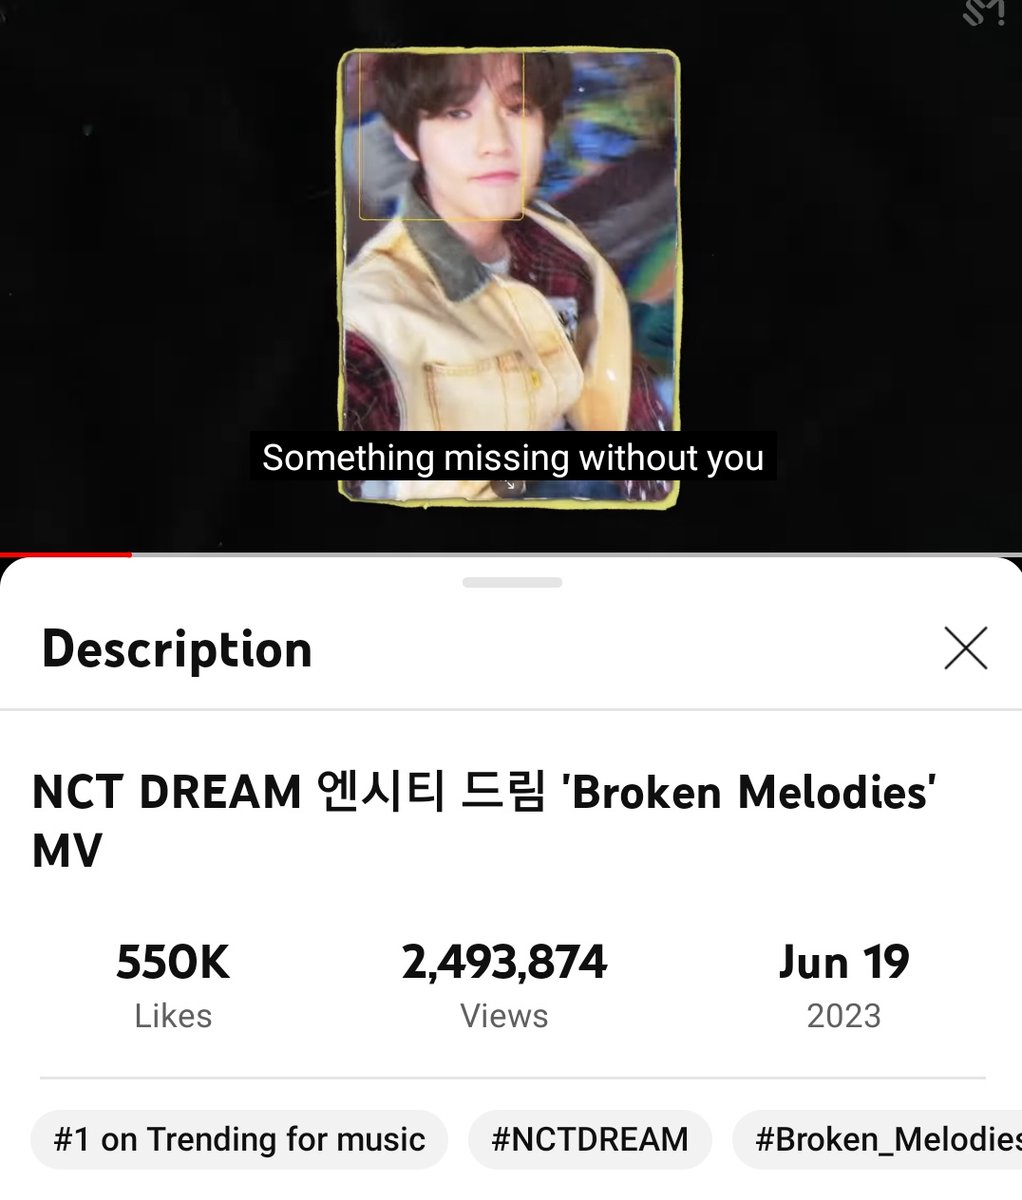 Almost 2,5M push it harder Dreamzens 🔥🔥🔥

CL said something missing without yall streaming Brodies 😬🔥

youtu.be/2R_S5TgDWMY

#BrokenMelodiesBy7DREAM #NCTDREAM_Broken_Melodies 
#드림만의_청춘_브로큰멜로디스